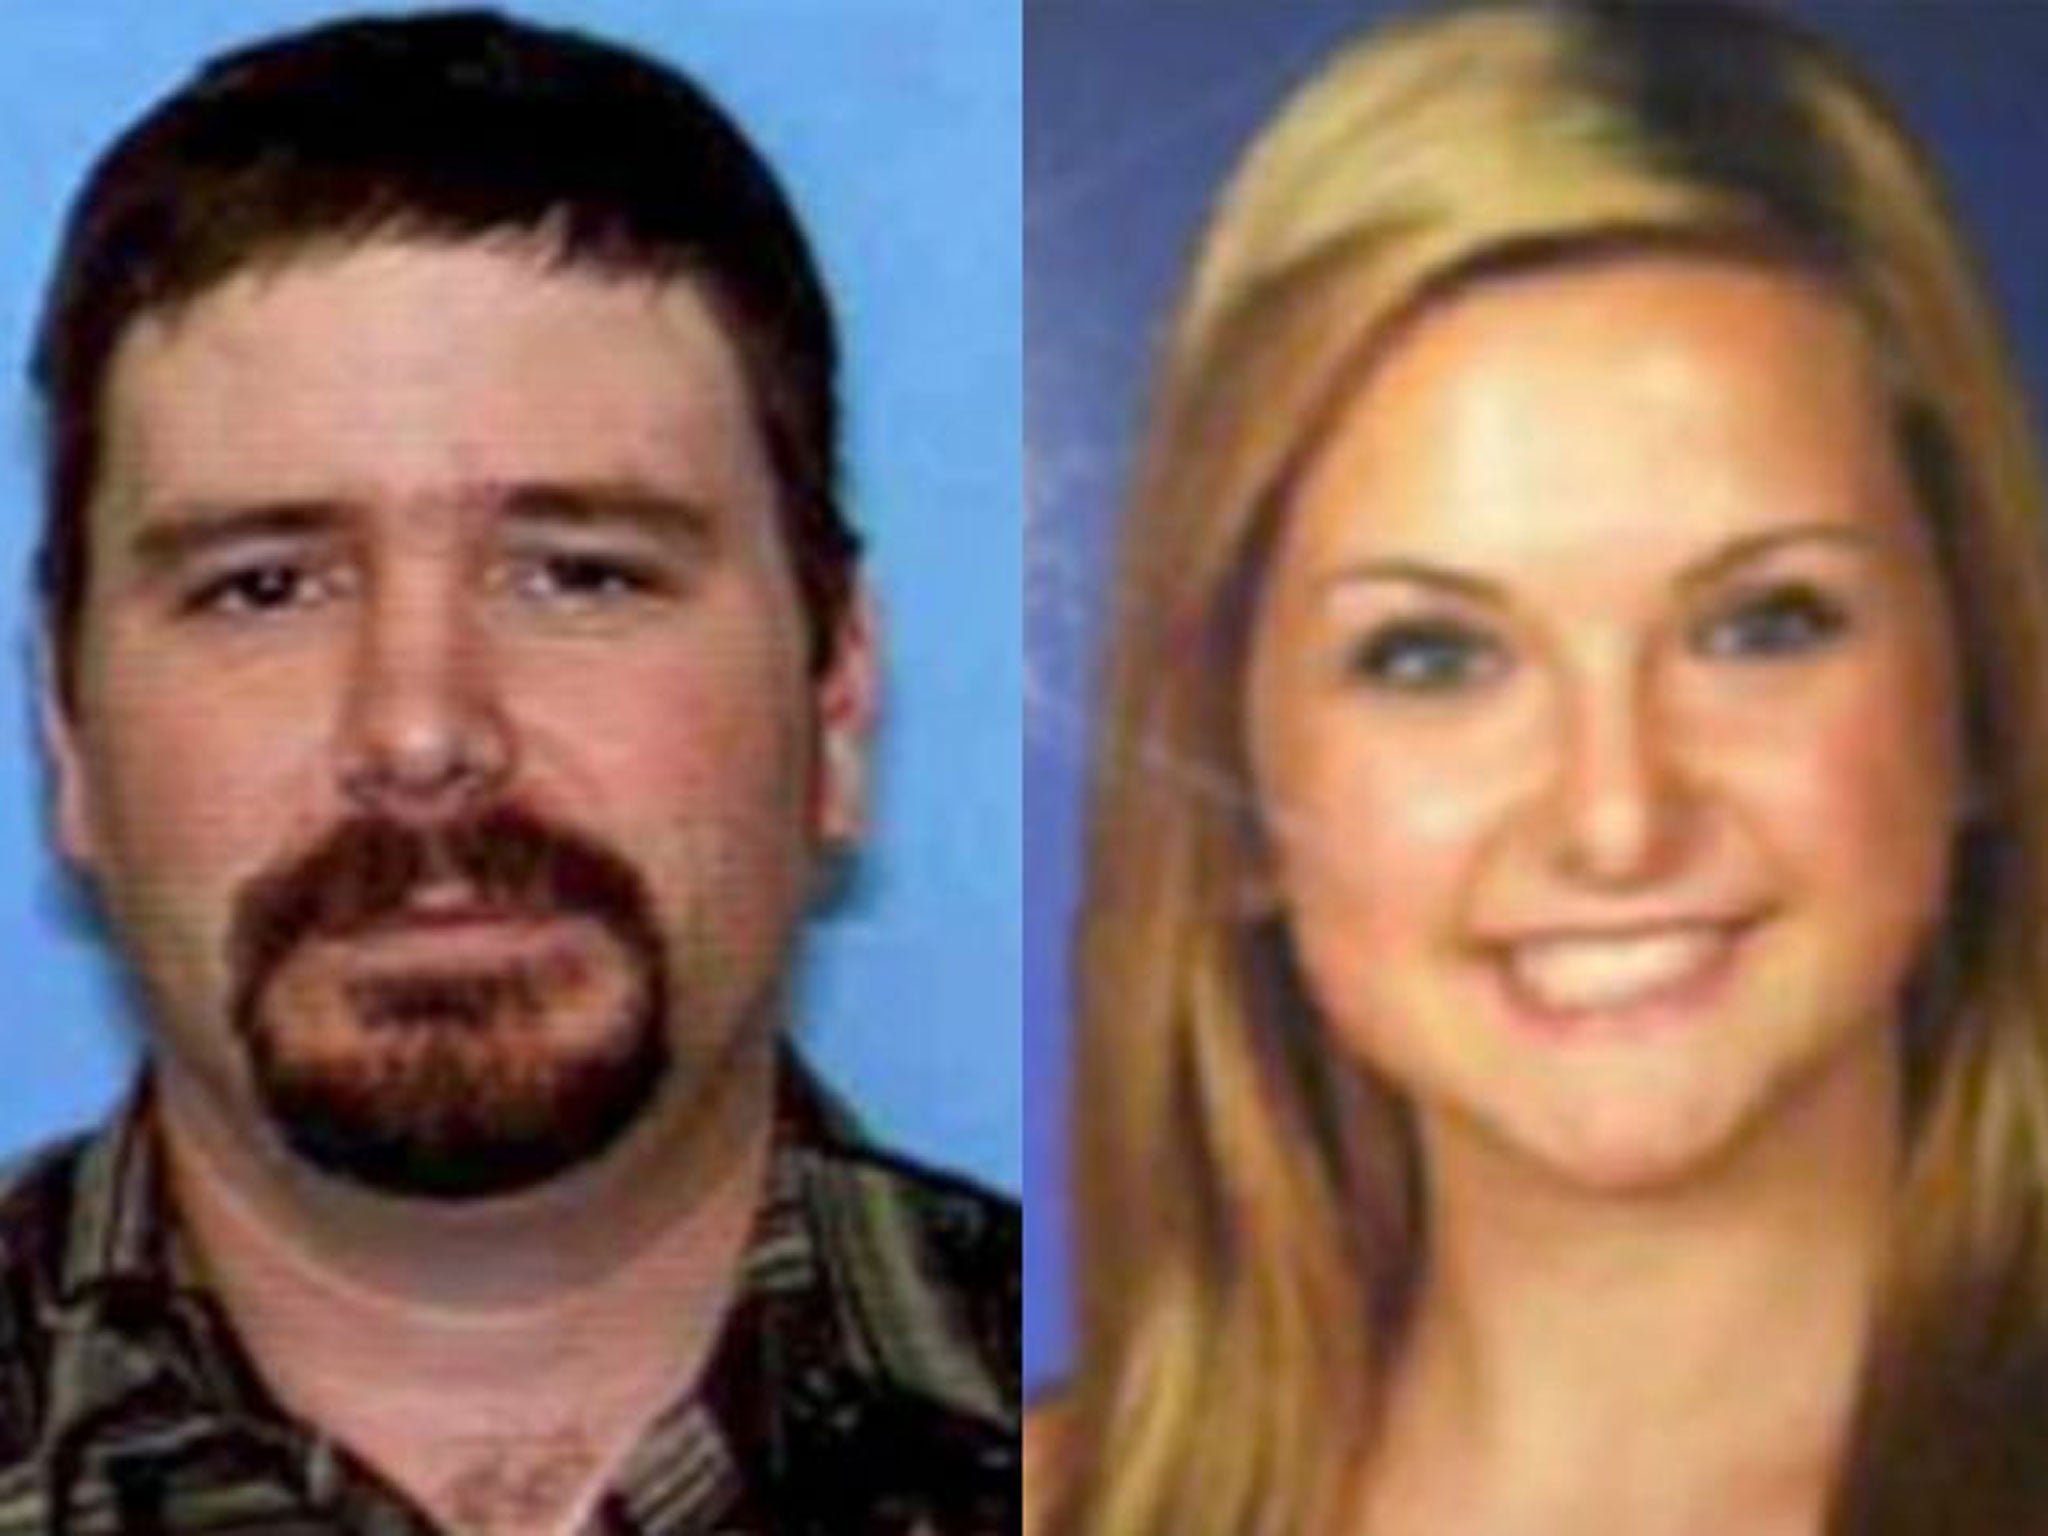 San Diego Sheriff's Department photos show James Lee DiMaggio, 40, left, and Hannah Anderson, 16. Anderson went online barely 48 hours after her rescue Saturday Aug. 10, 2013 and started fielding hundreds of questions through a social media site.